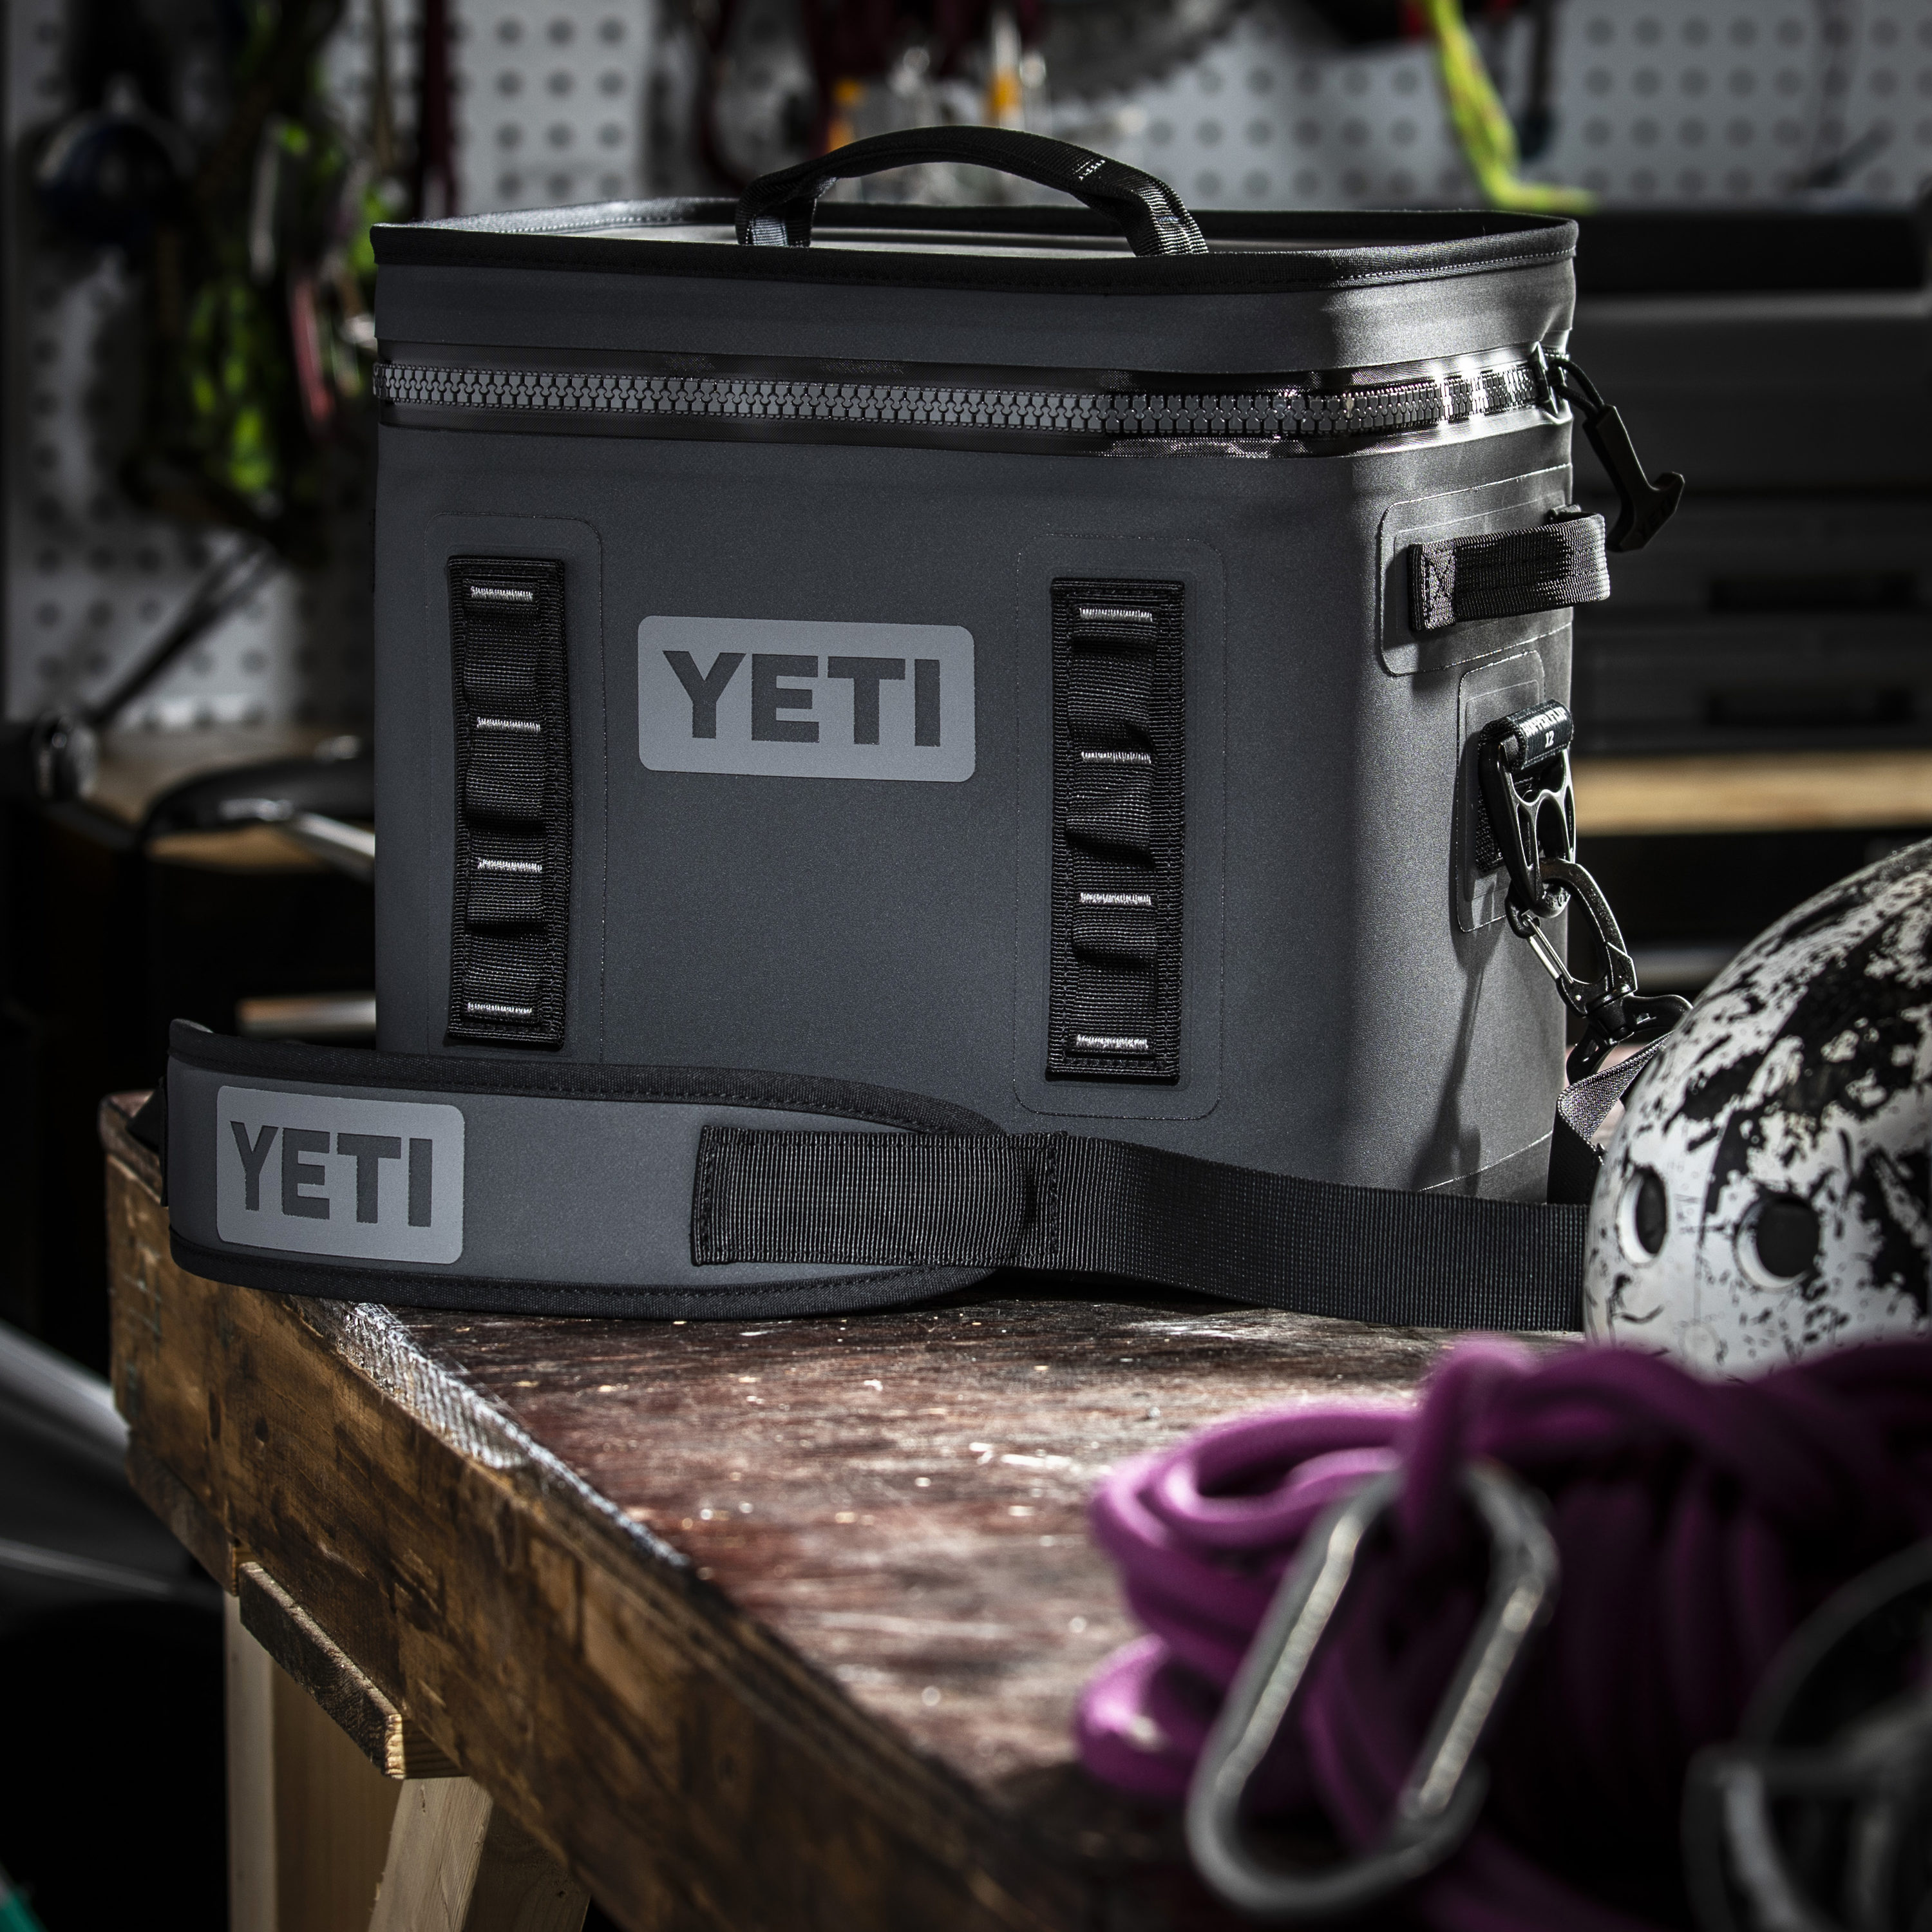 YETI Hopper Flip 12 Insulated Personal Cooler, Charcoal at Lowes.com